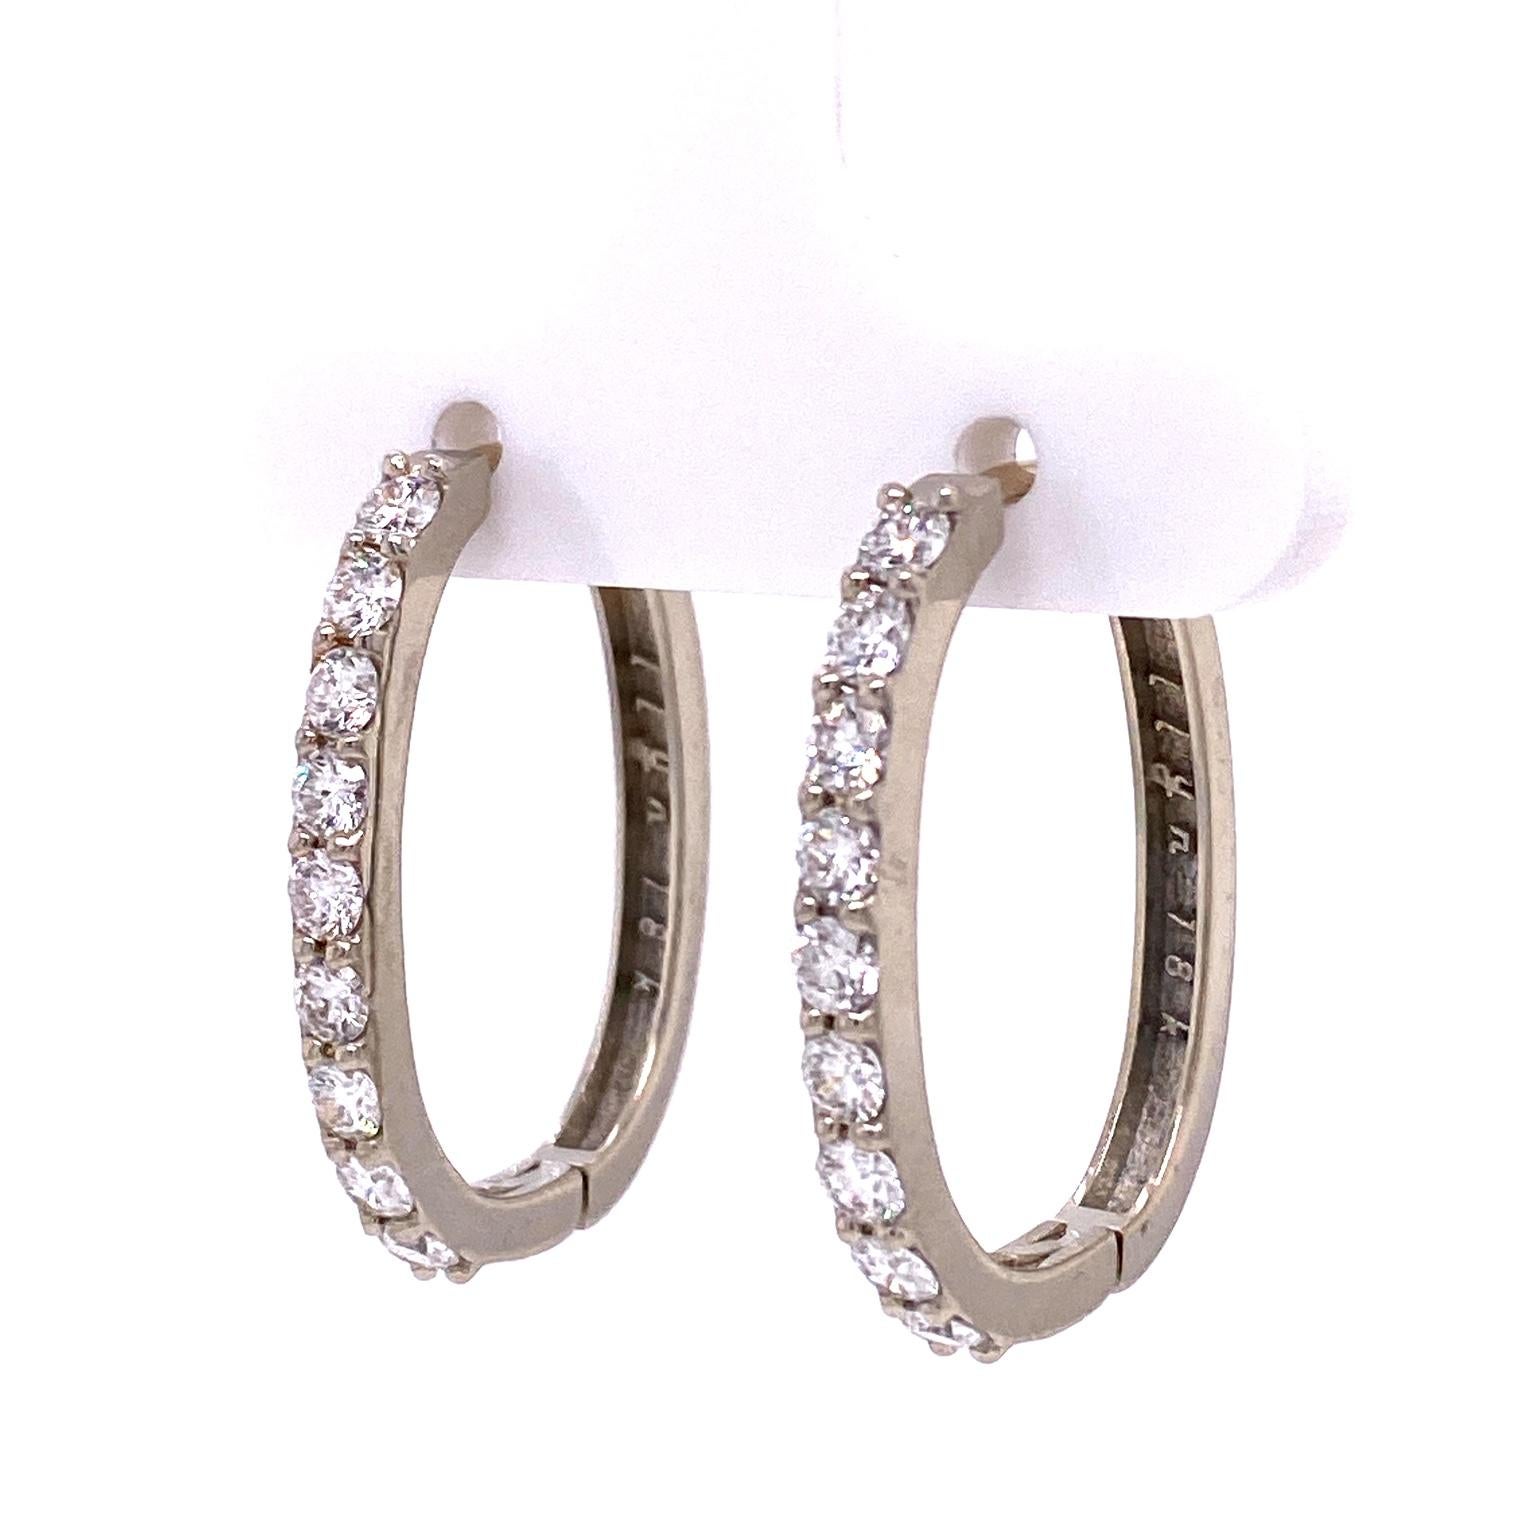 Contemporary 18 Karat White Gold White Diamond Hoops with Grey Moonstone Earring Jackets